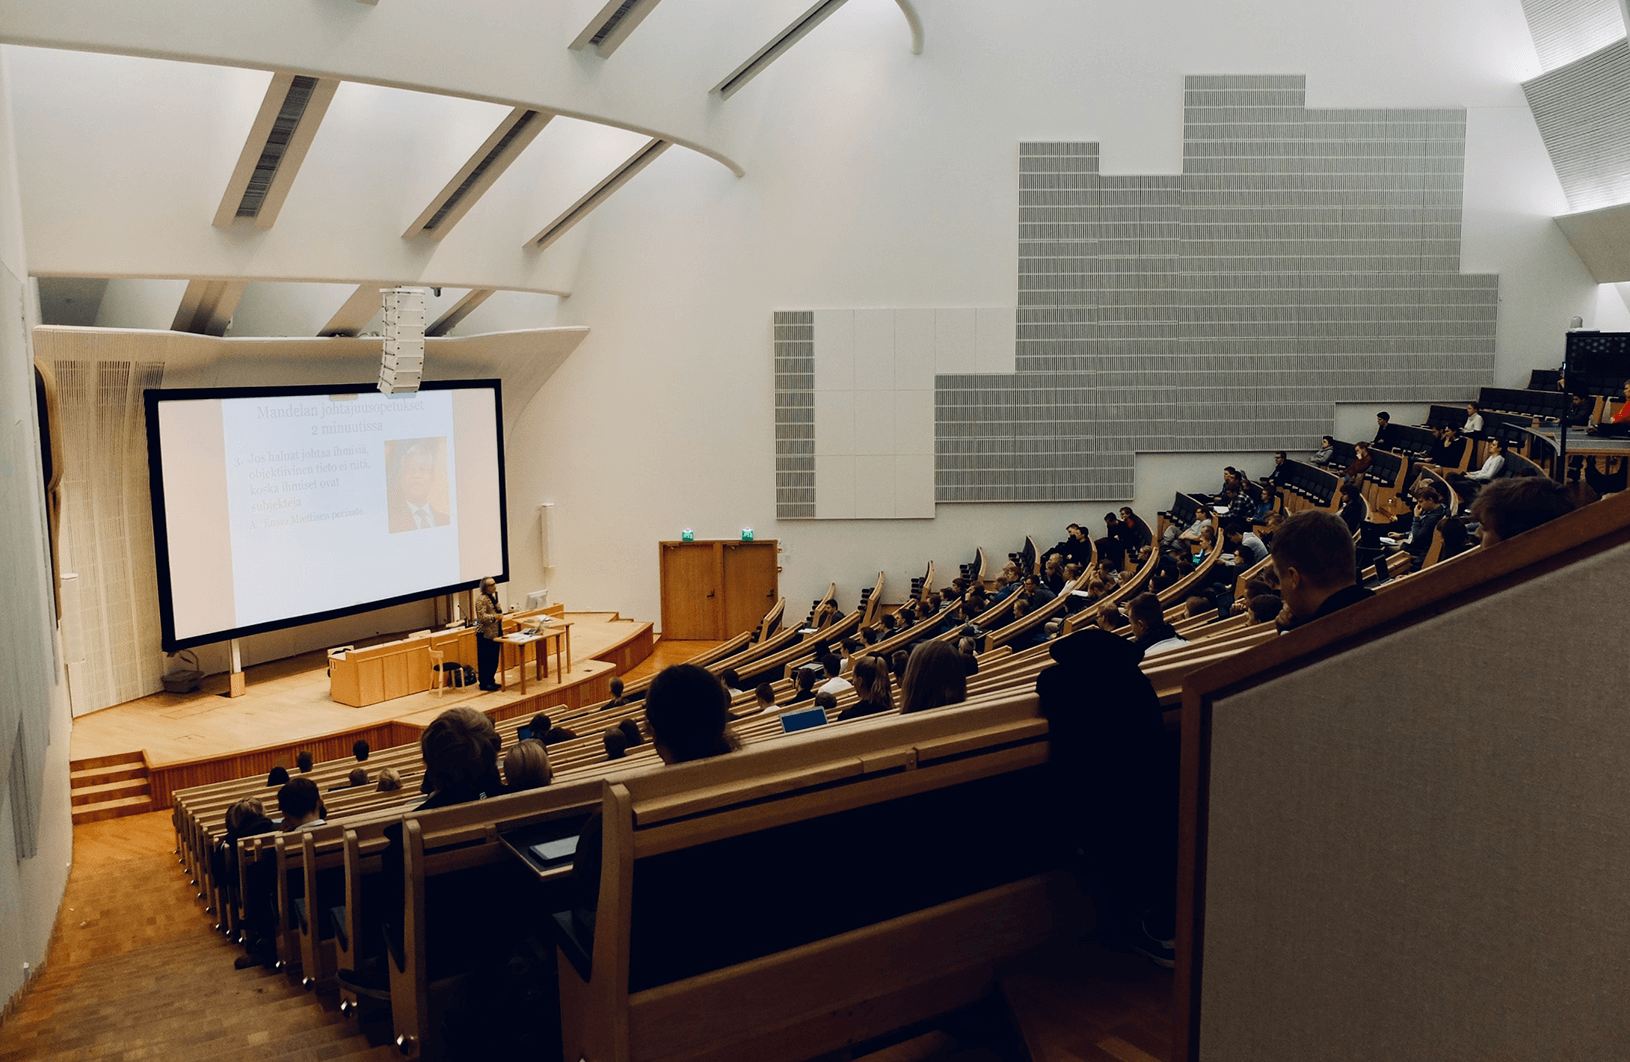 Accessibility in higher education: Large university auditorium with diverse students attending a lecture. Rows of seating, a podium, and students focused on the speaker.